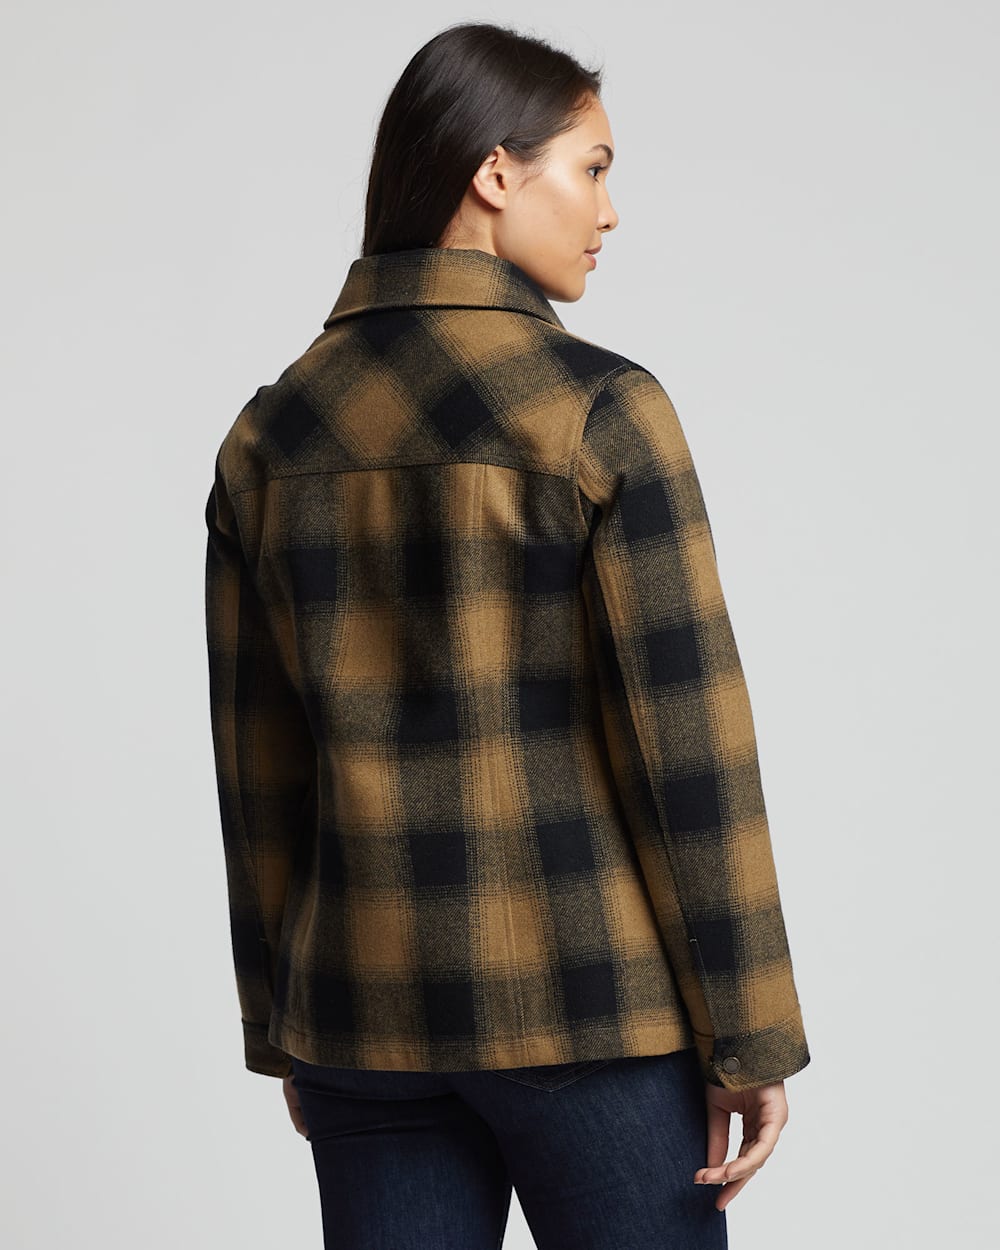 ALTERNATE VIEW OF WOMEN'S STANFORD BOXY BOMBER JACKET IN CAMEL/BLACK BUFFALO CHECK image number 3